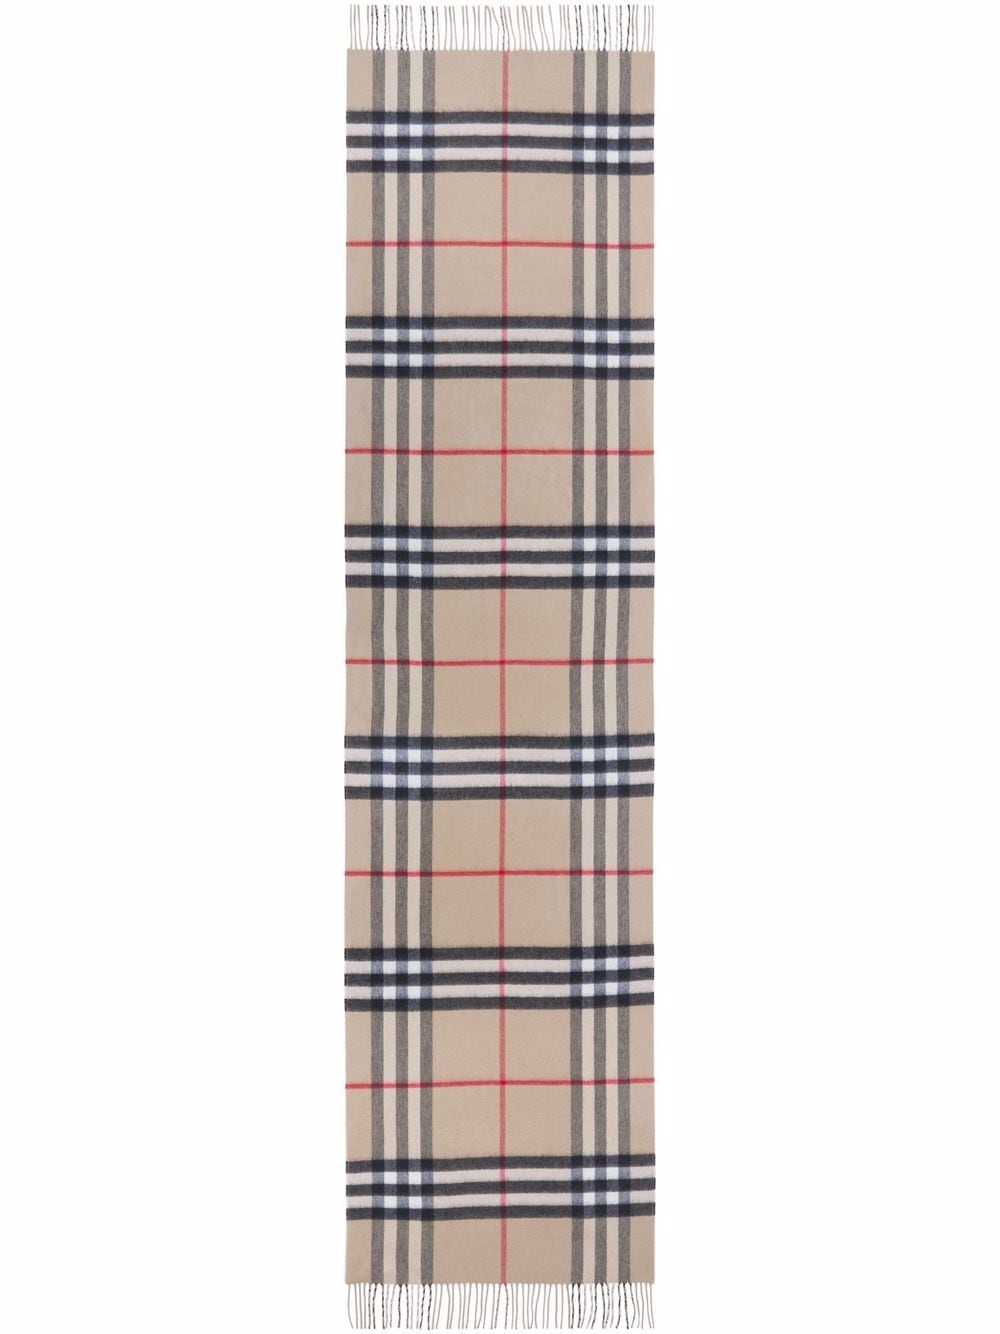 BURBERRY Reversible Check Cashmere Scarf for Men in Tan